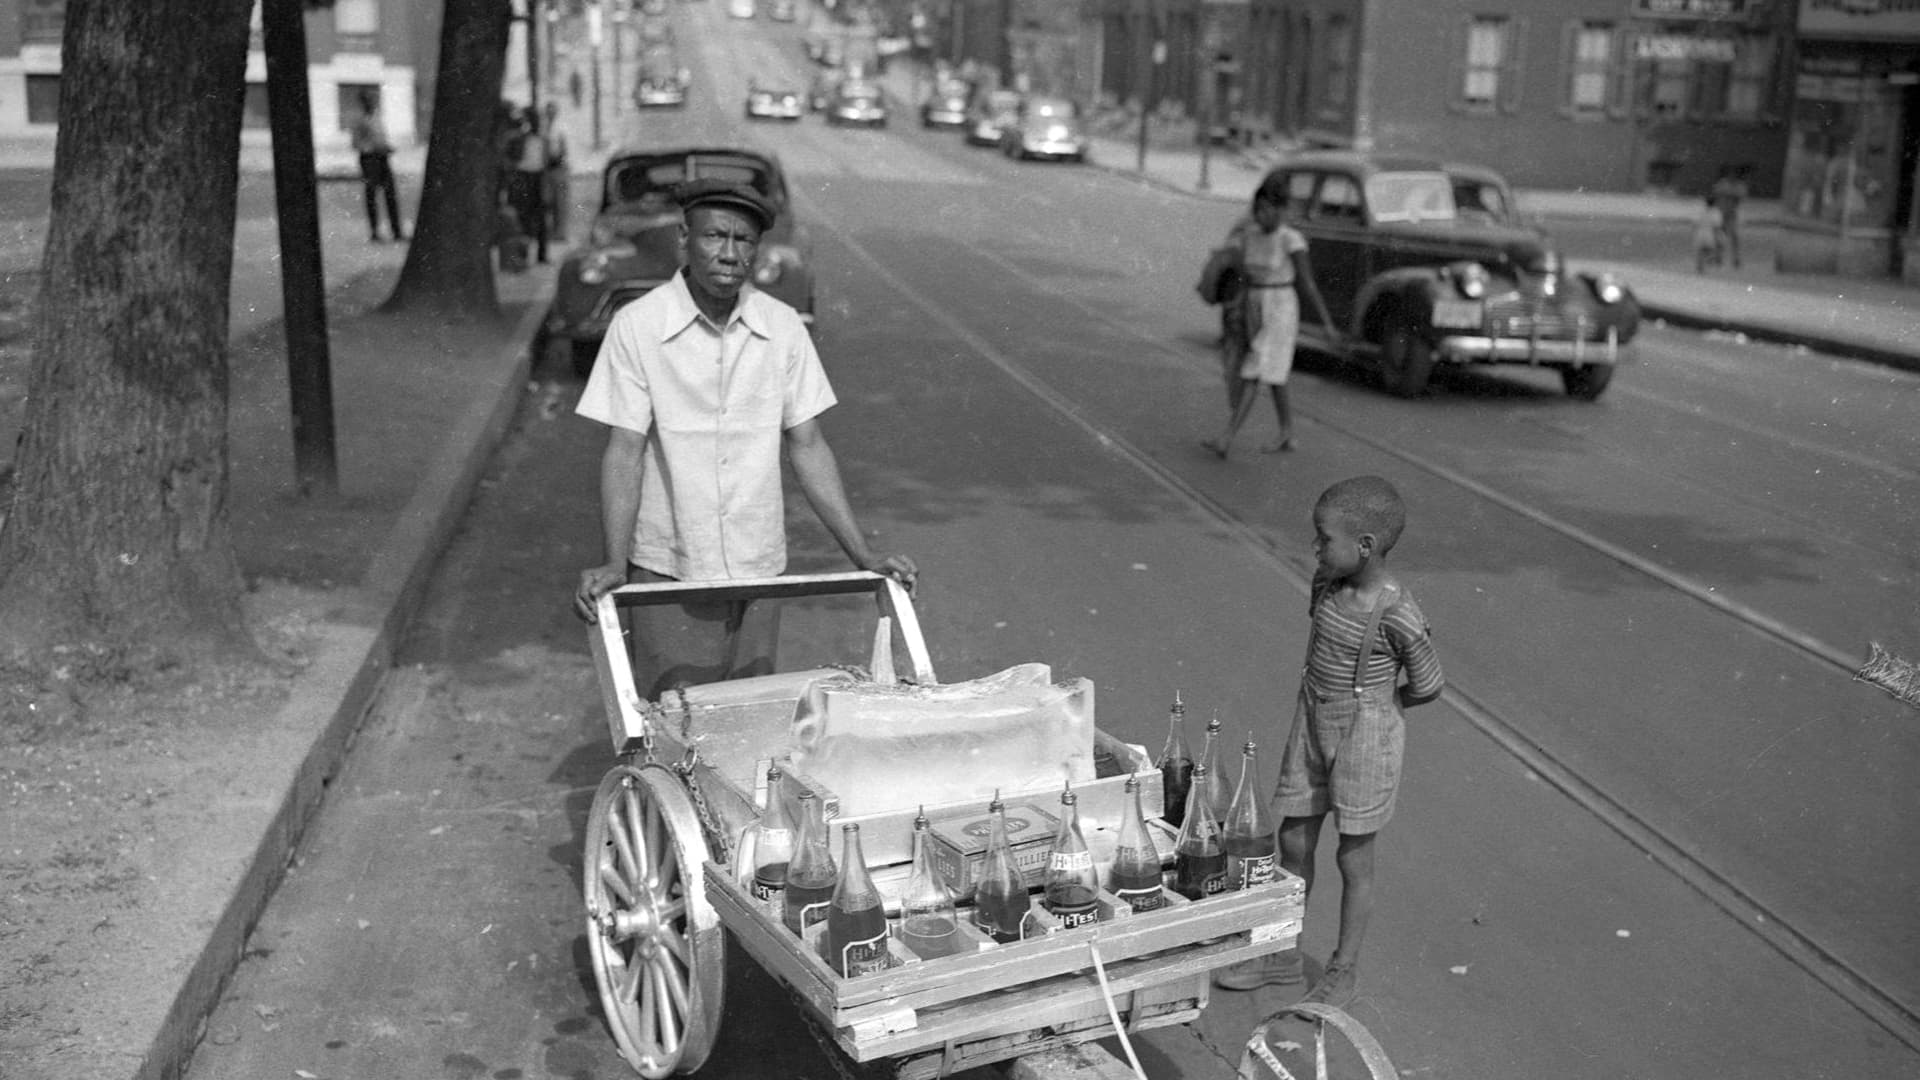 A young boy hovers expectantly near a snowball vendor in 1940s Harlem Park